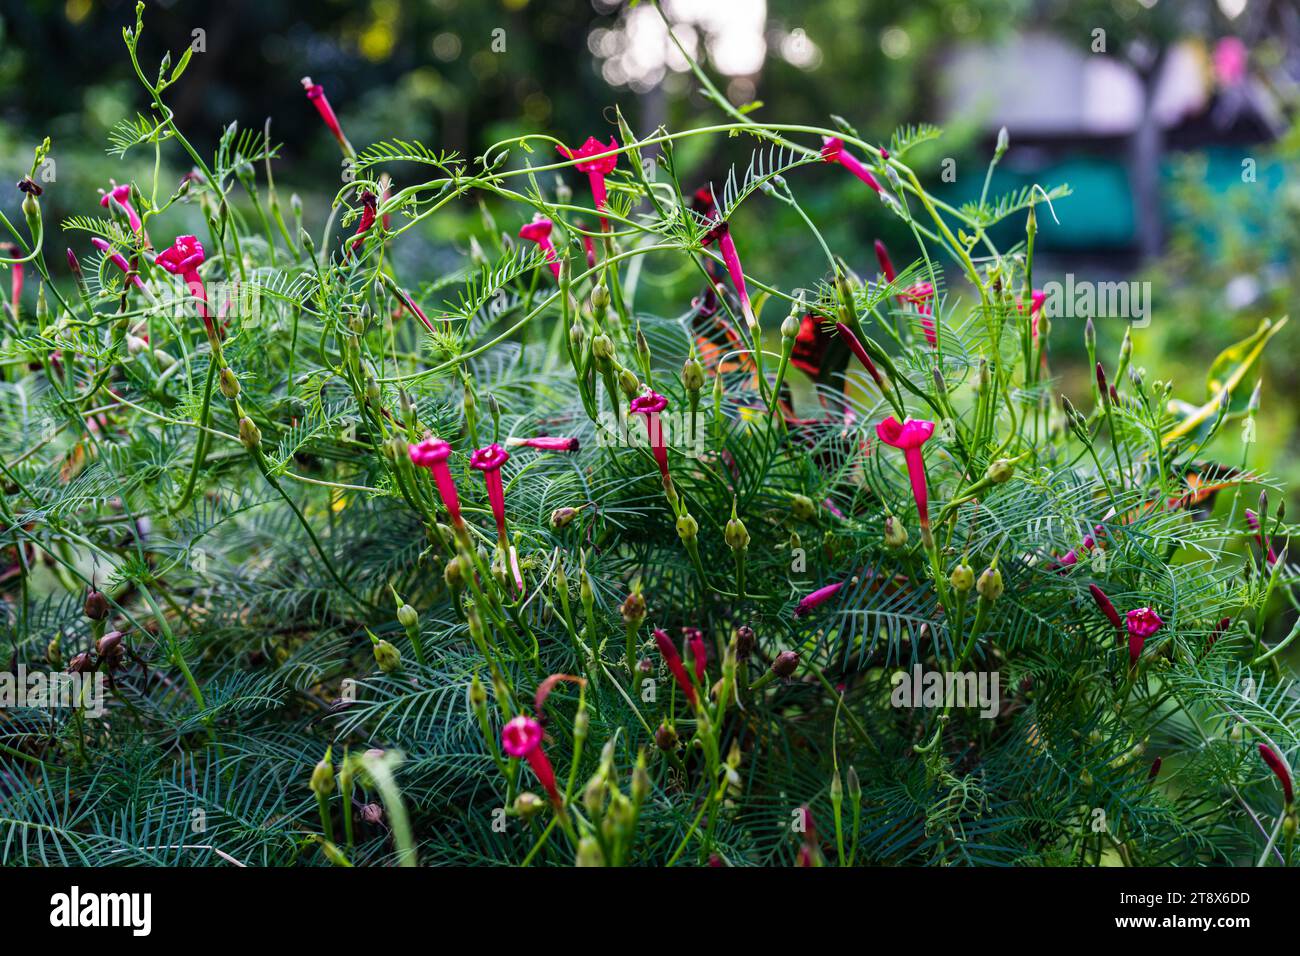 Cypressvine morning glory or cardinal creeper, cypress vine (Ipomoea quamoclit) on green leaves background. Selective focus Stock Photo